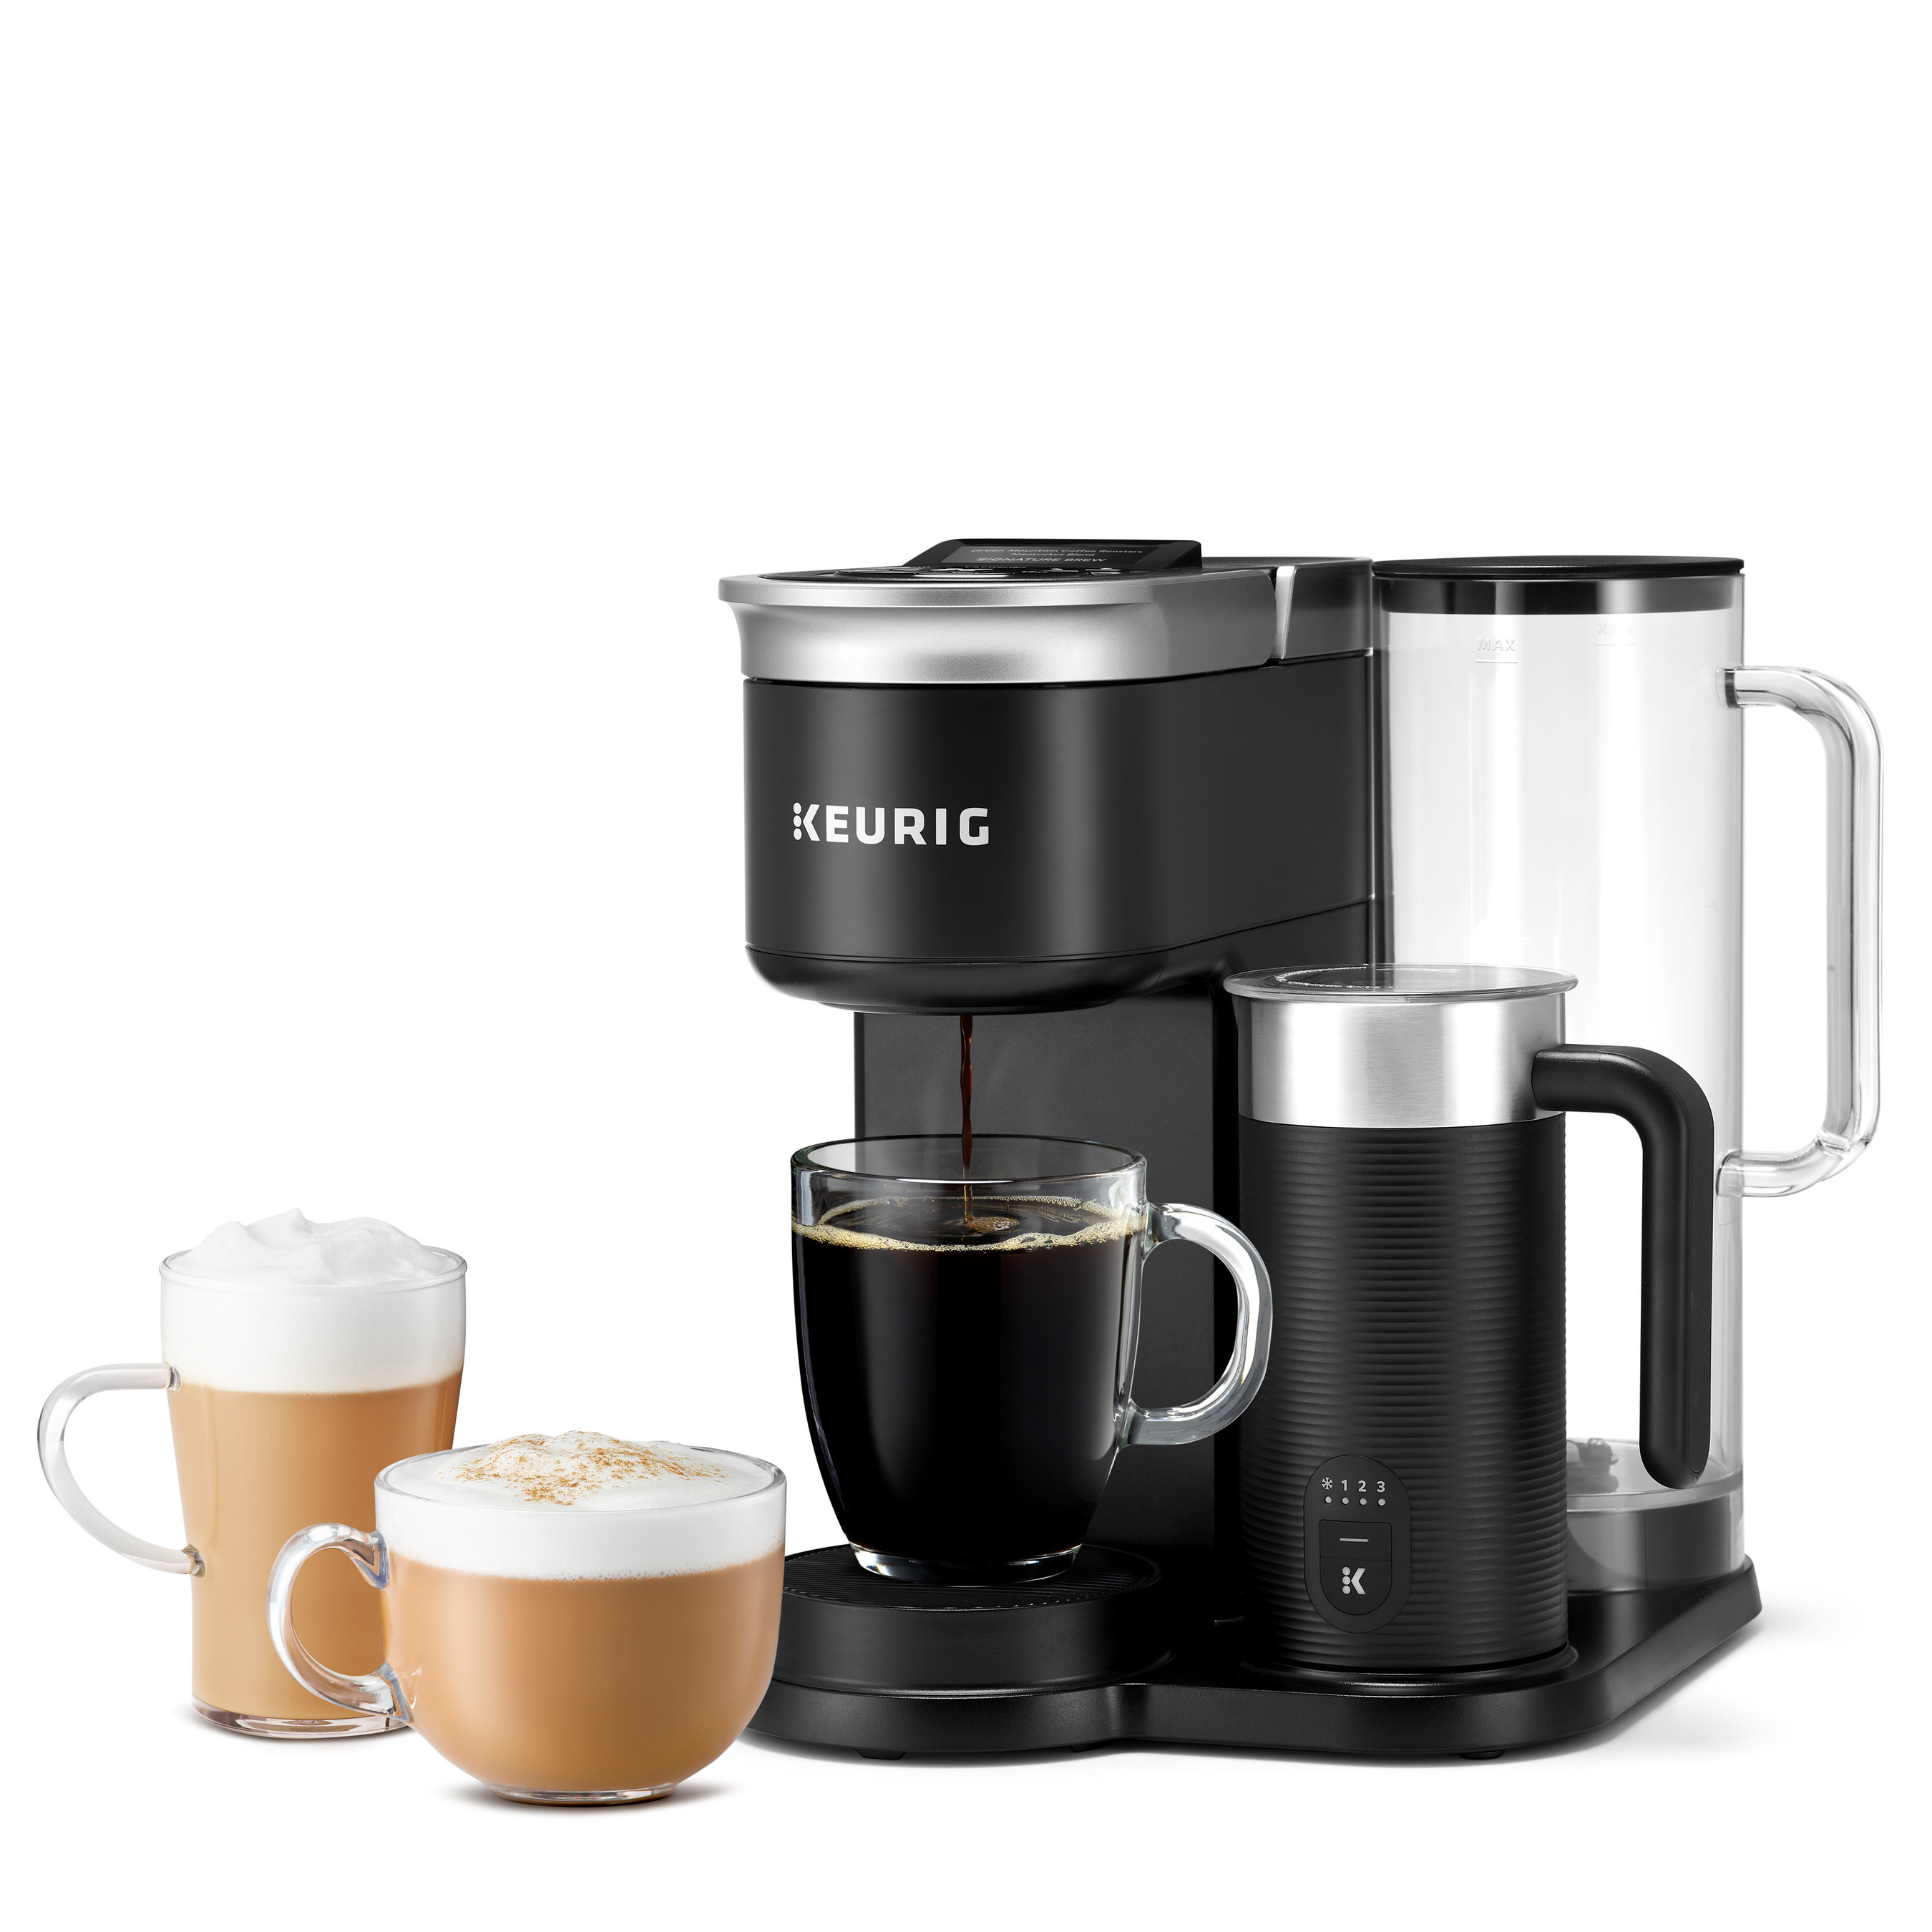 Keurig Brings Coffeehouse Beverages Home with New, All-in-One